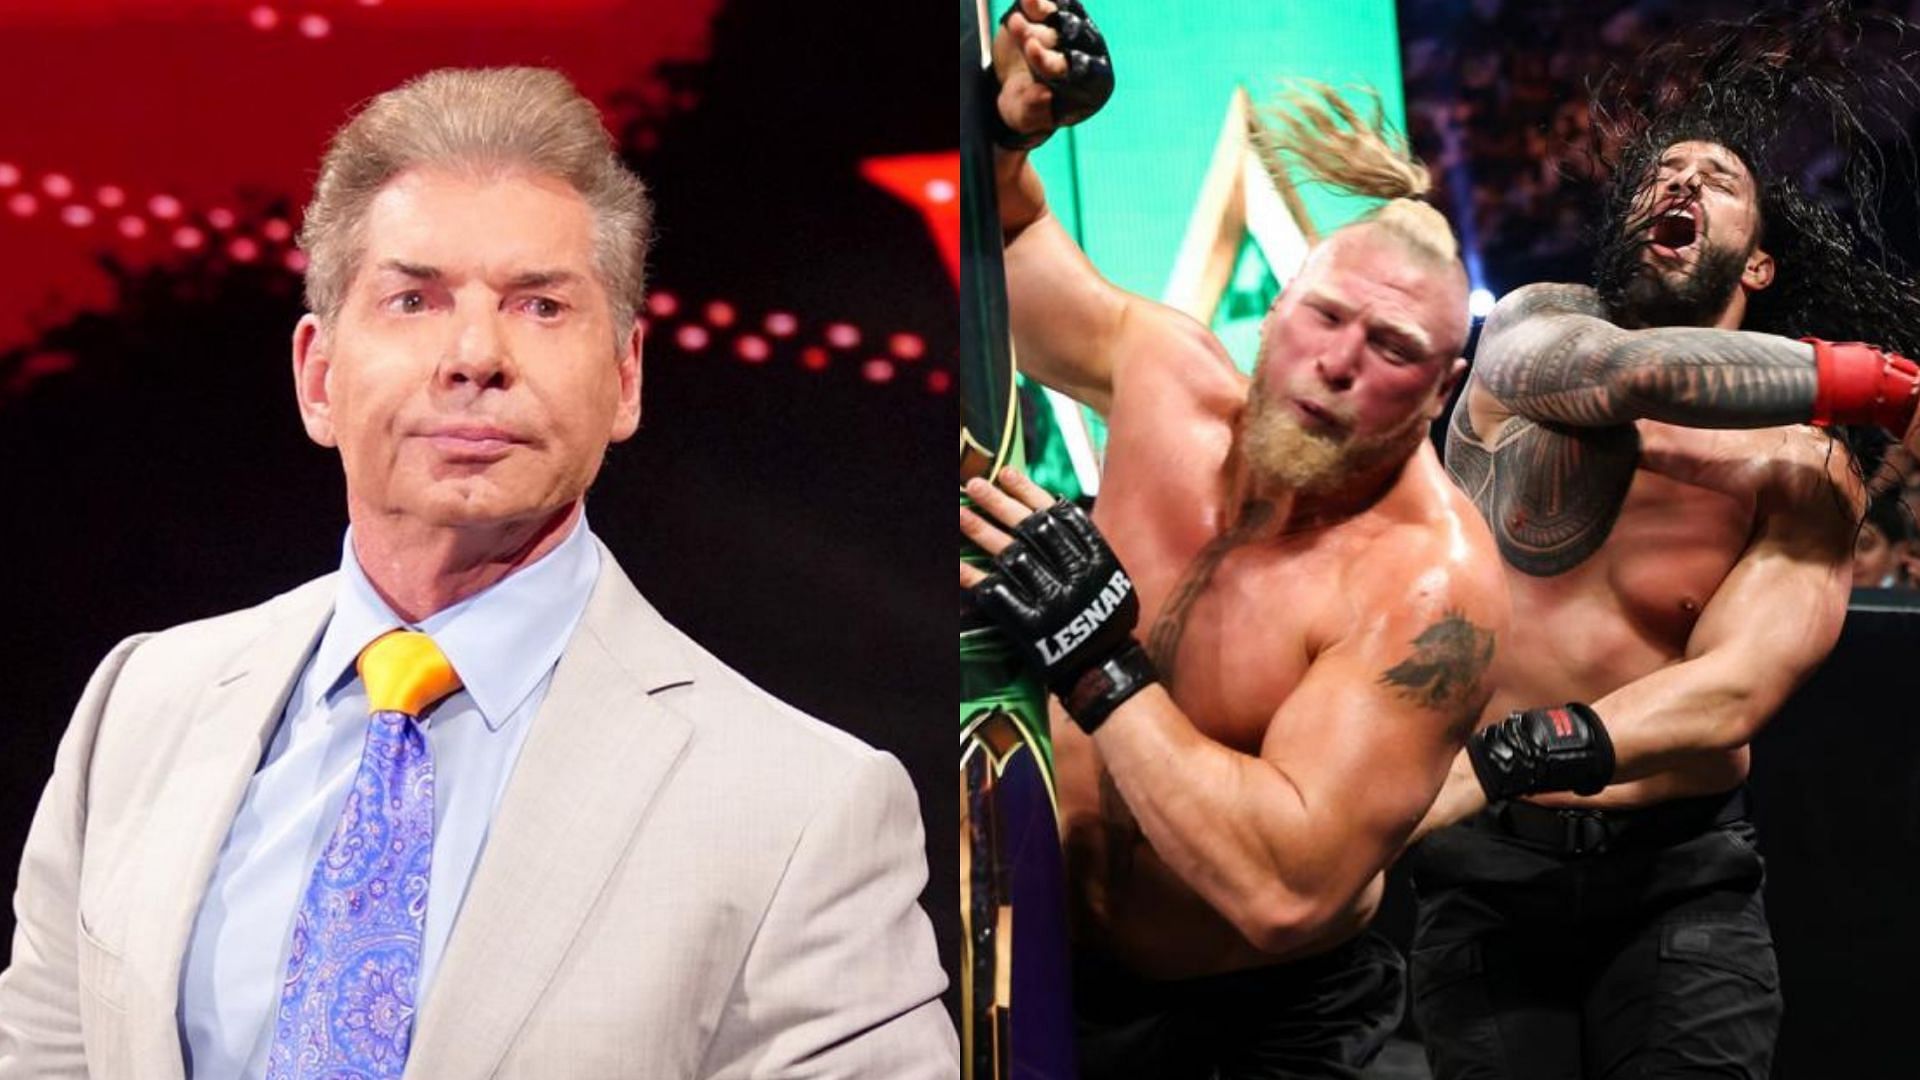 Vince McMahon, Brock Lesnar, and Roman Reigns.